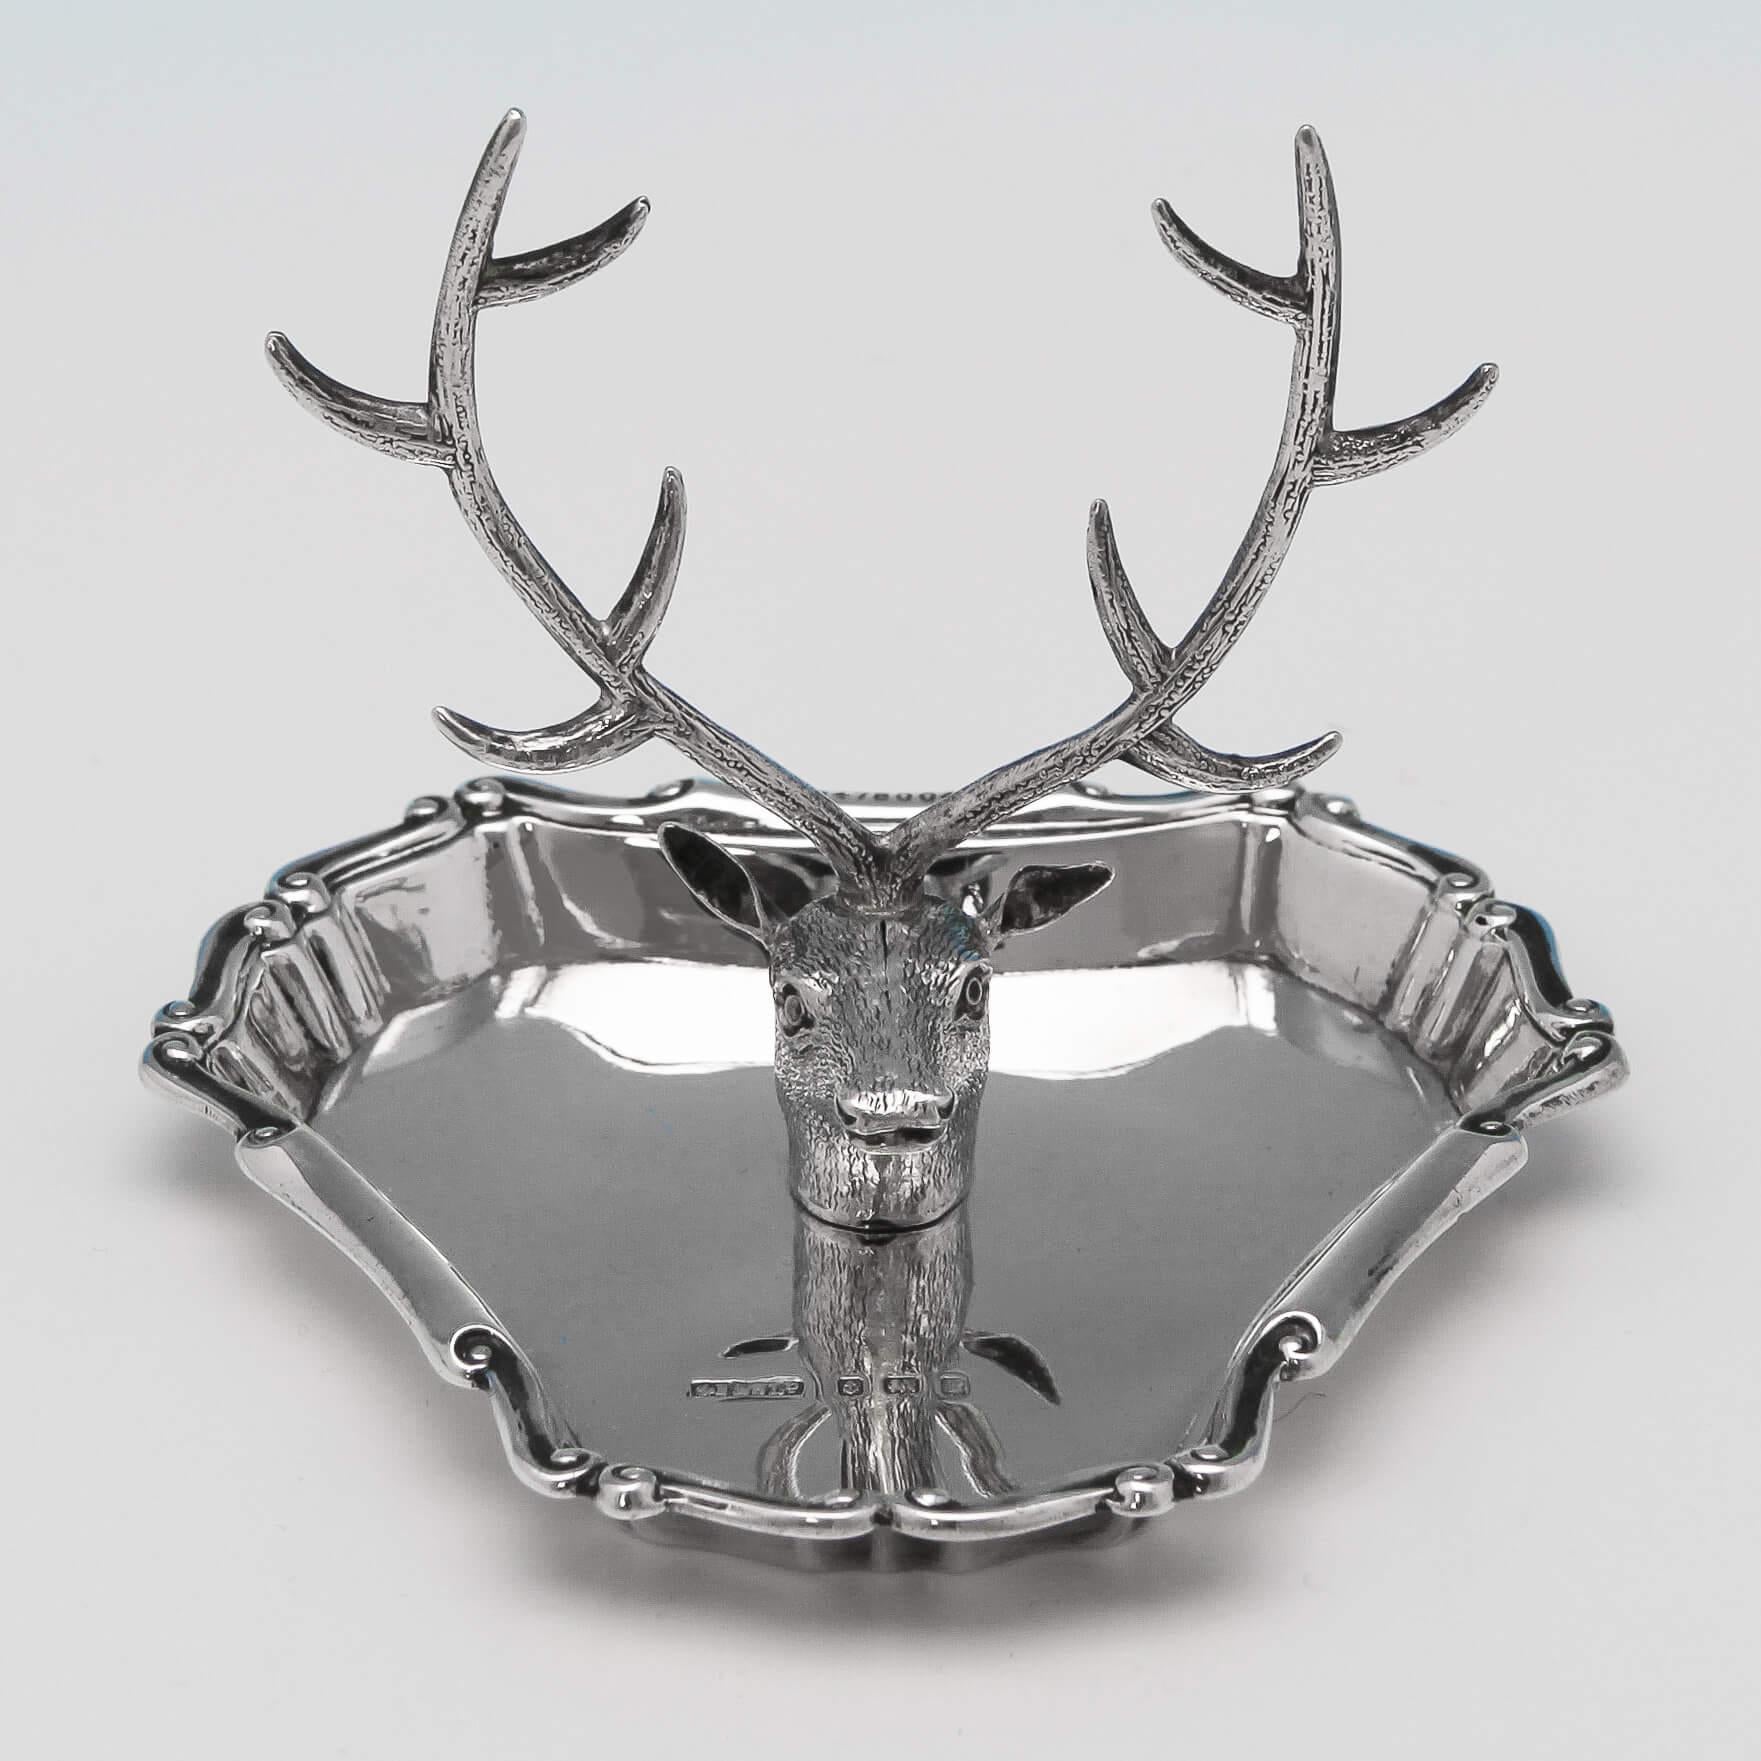 Hallmarked in Birmingham, 1905 by Stokes & Ireland, this novel Edwardian, Antique Sterling Silver Ring Tree, suspends rings on a stag's antlers. The dish itself, has a shaped scroll border. This ring tree is 2.75